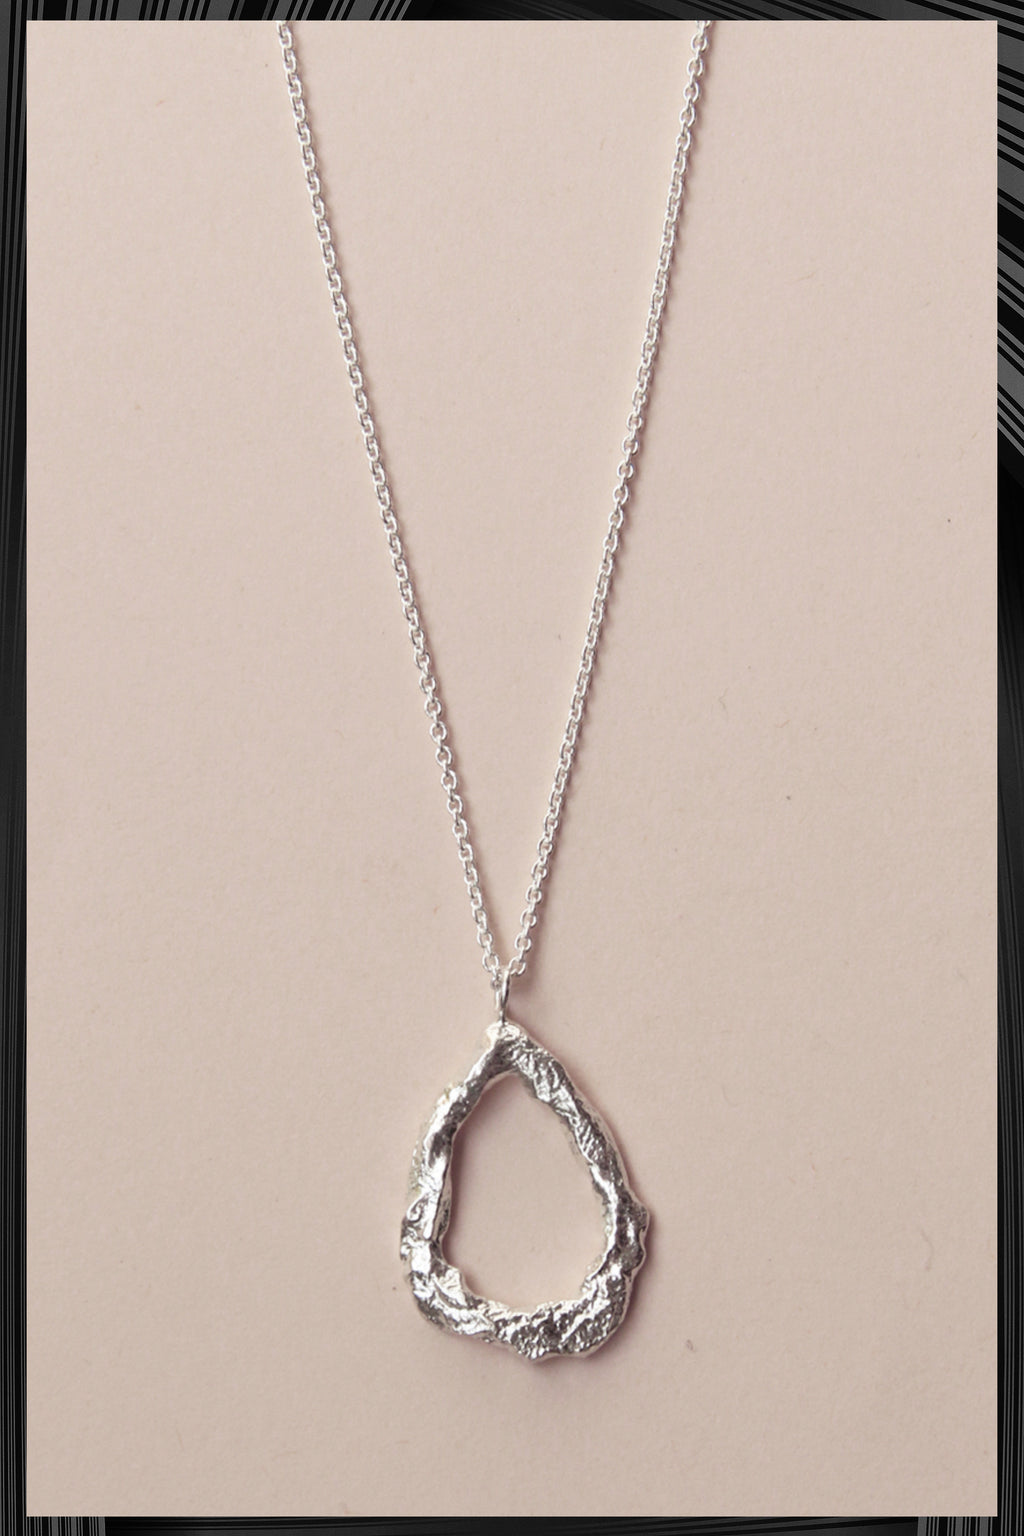 Melt Drop Necklace | Free Delivery - 1-2 Weeks Shipping